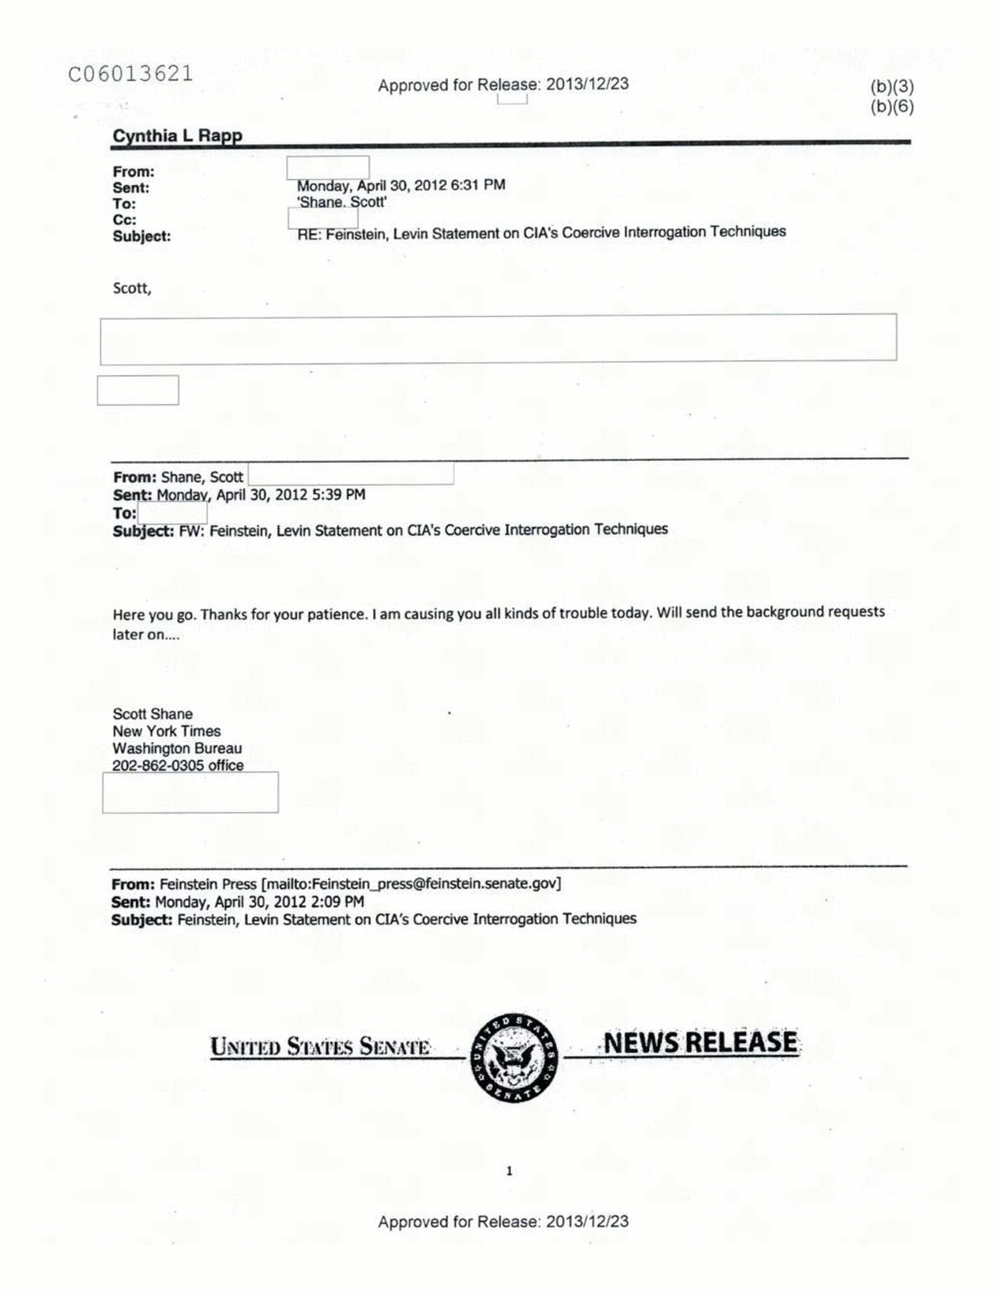 Page 455 from Email Correspondence Between Reporters and CIA Flacks